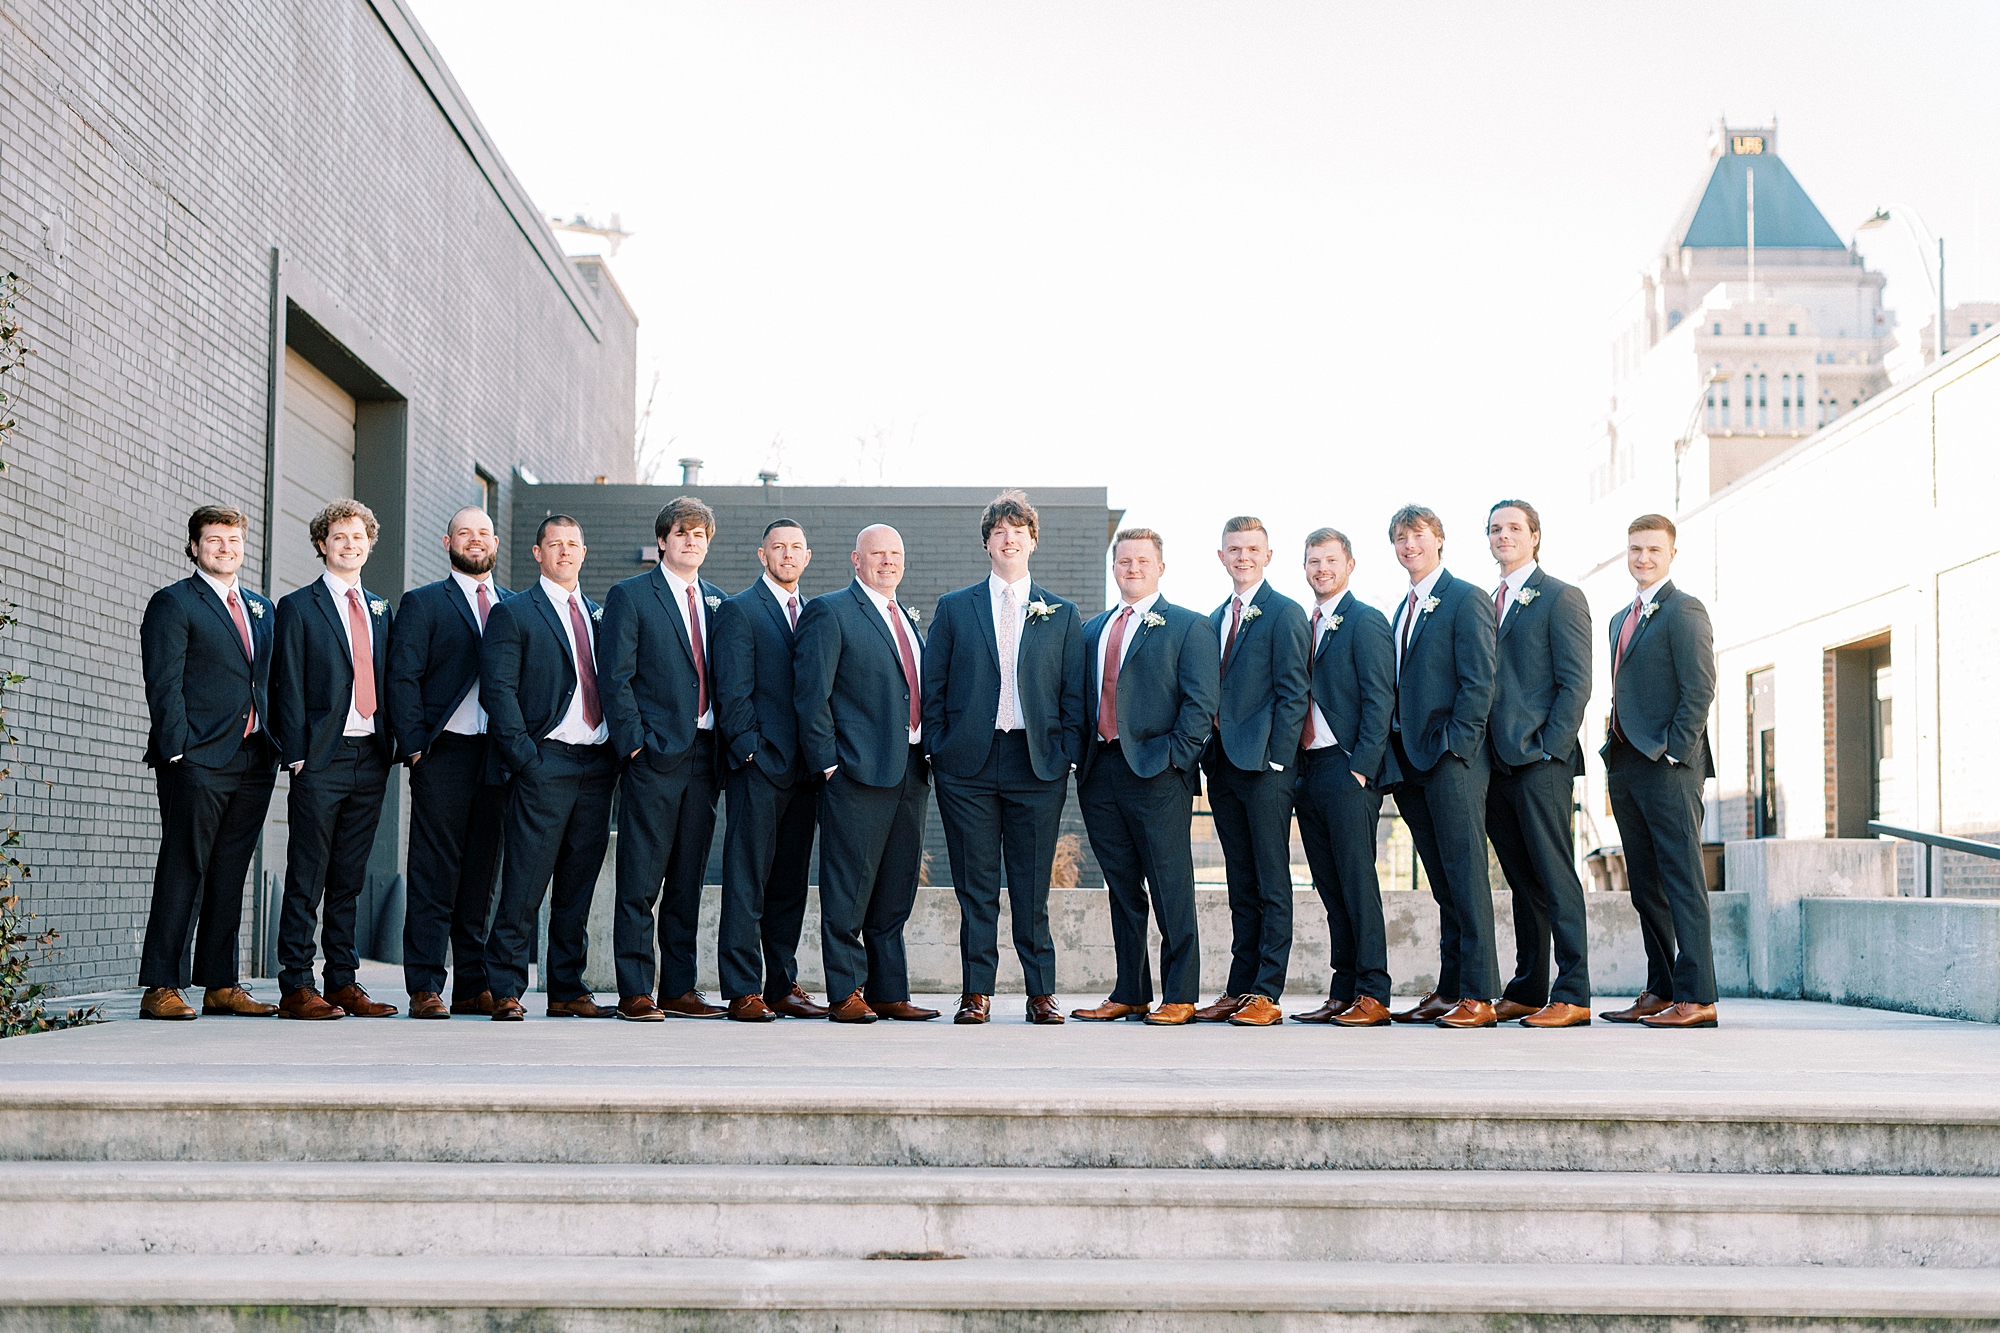 groom poses with groomsmen in navy suits at Cadillac Service Garage